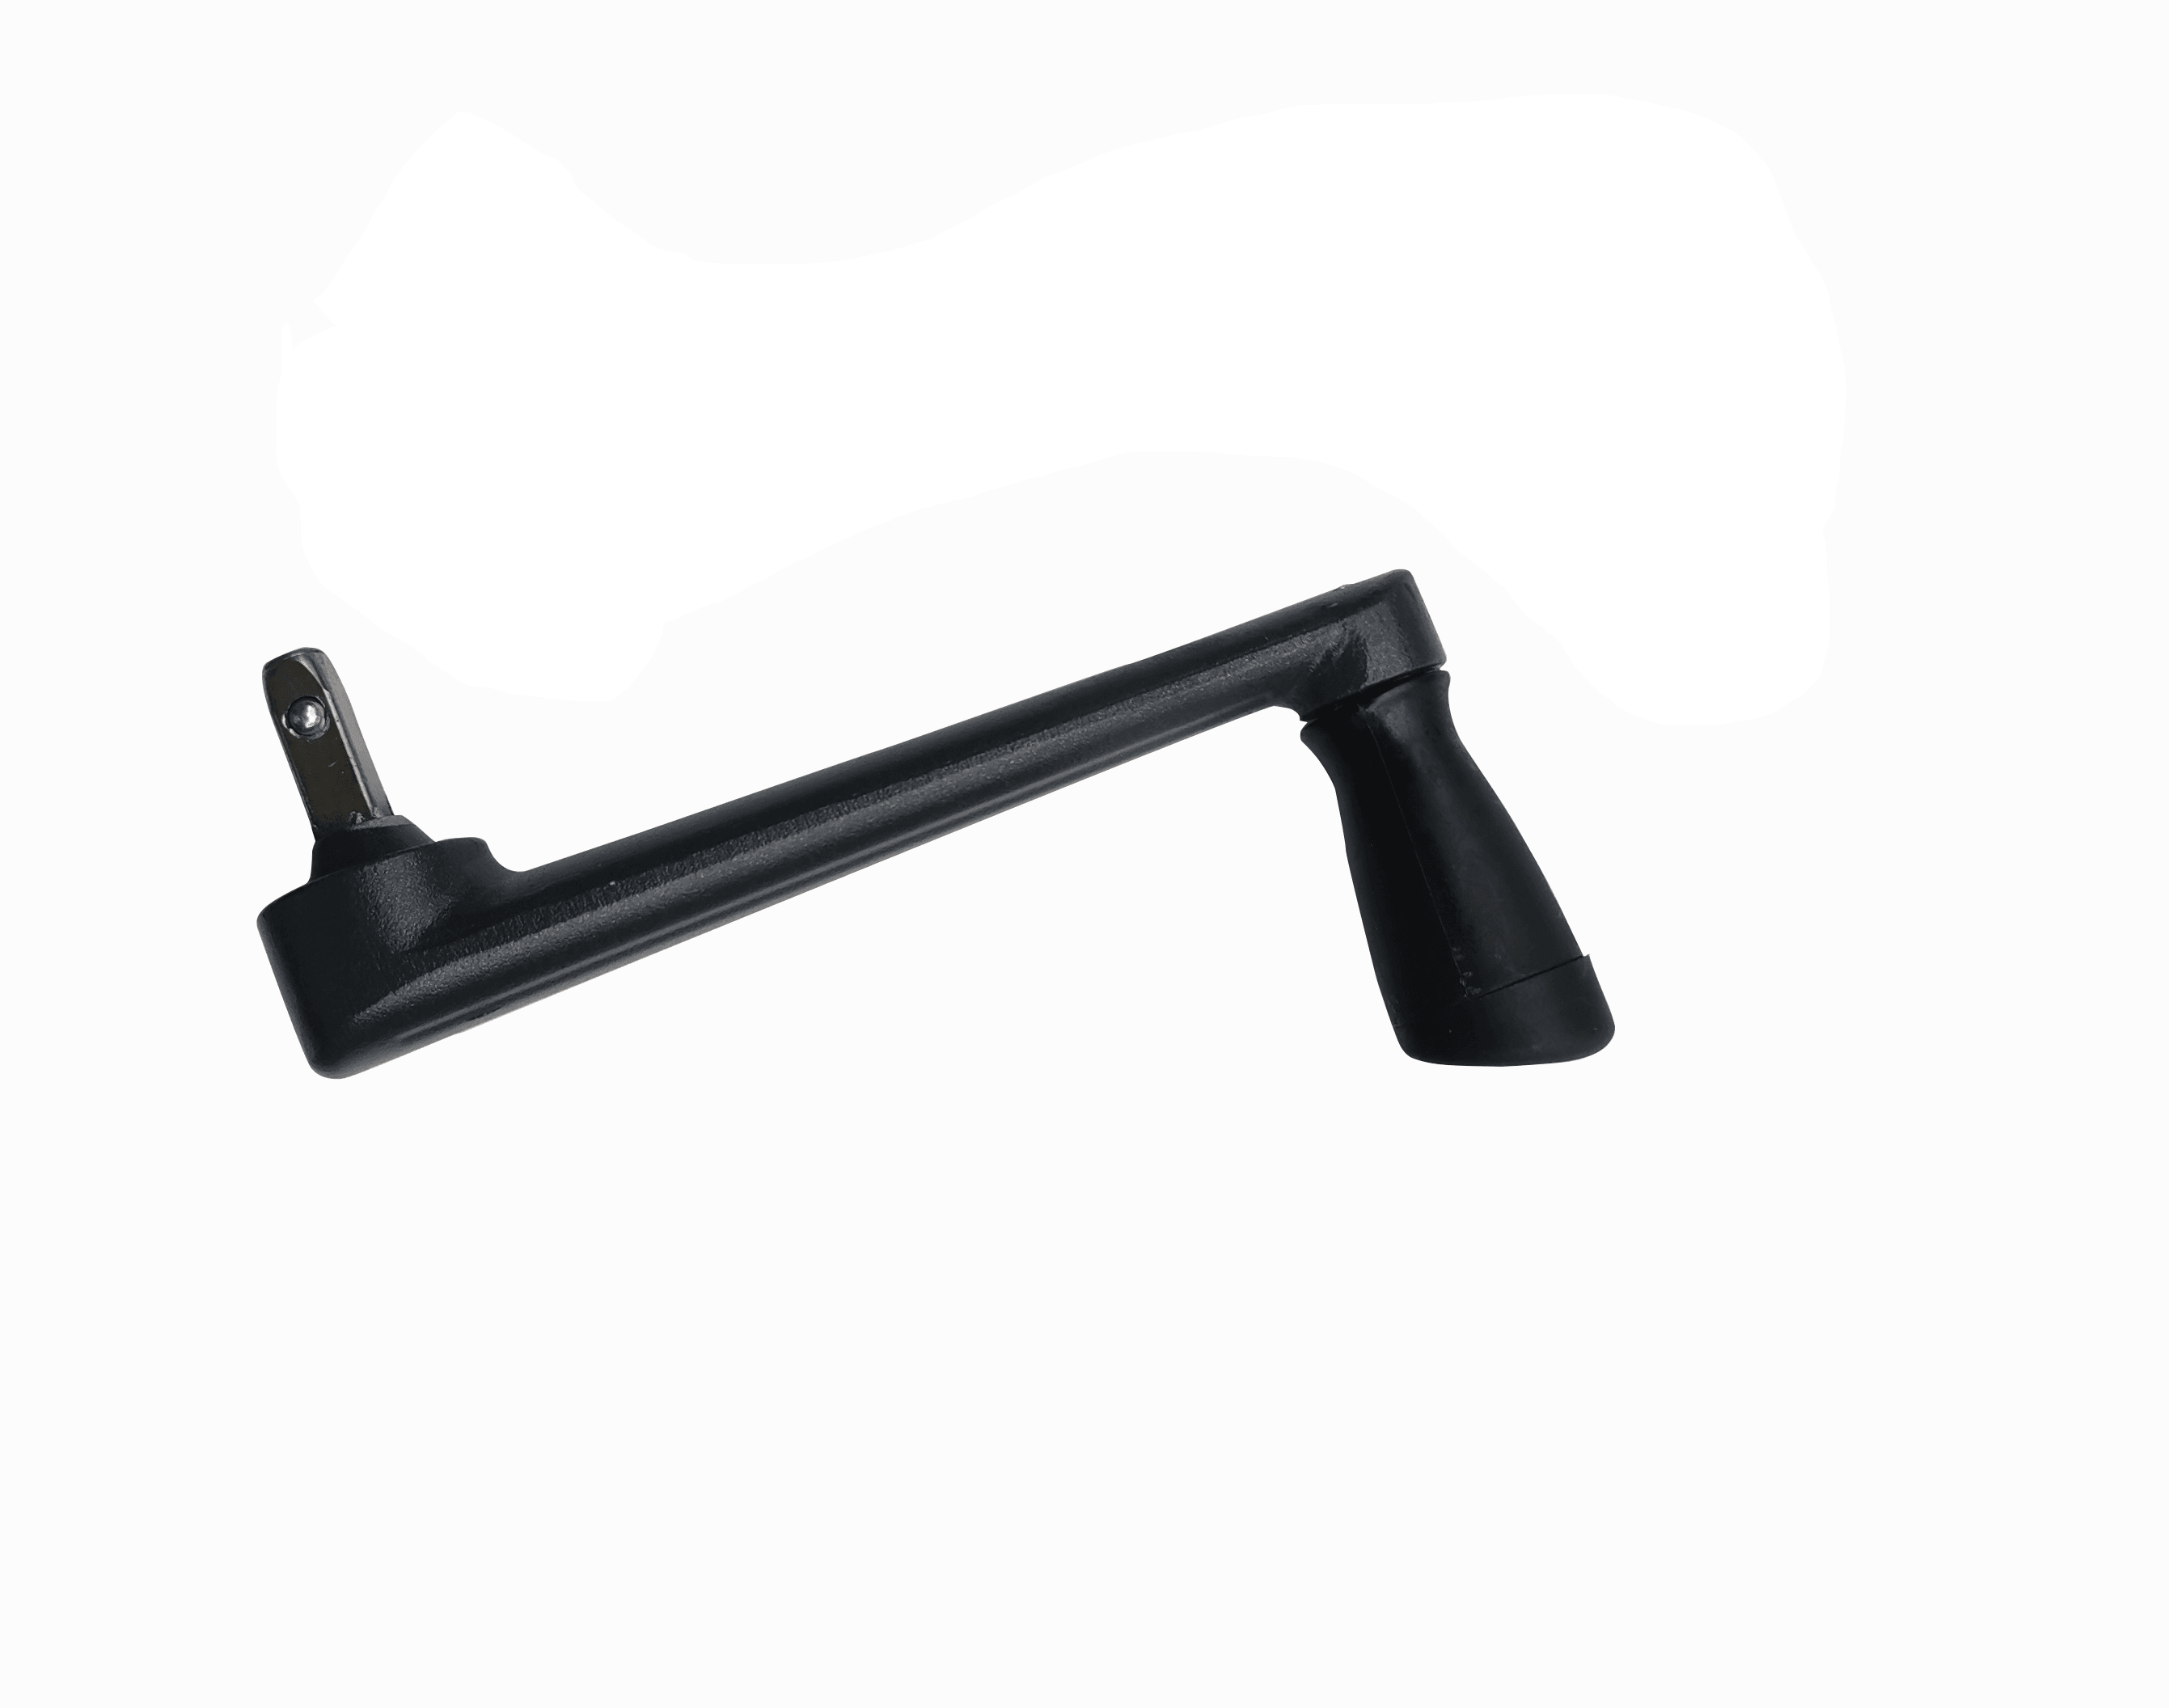 Replacement Hand Crank for Cantilever Umbrella